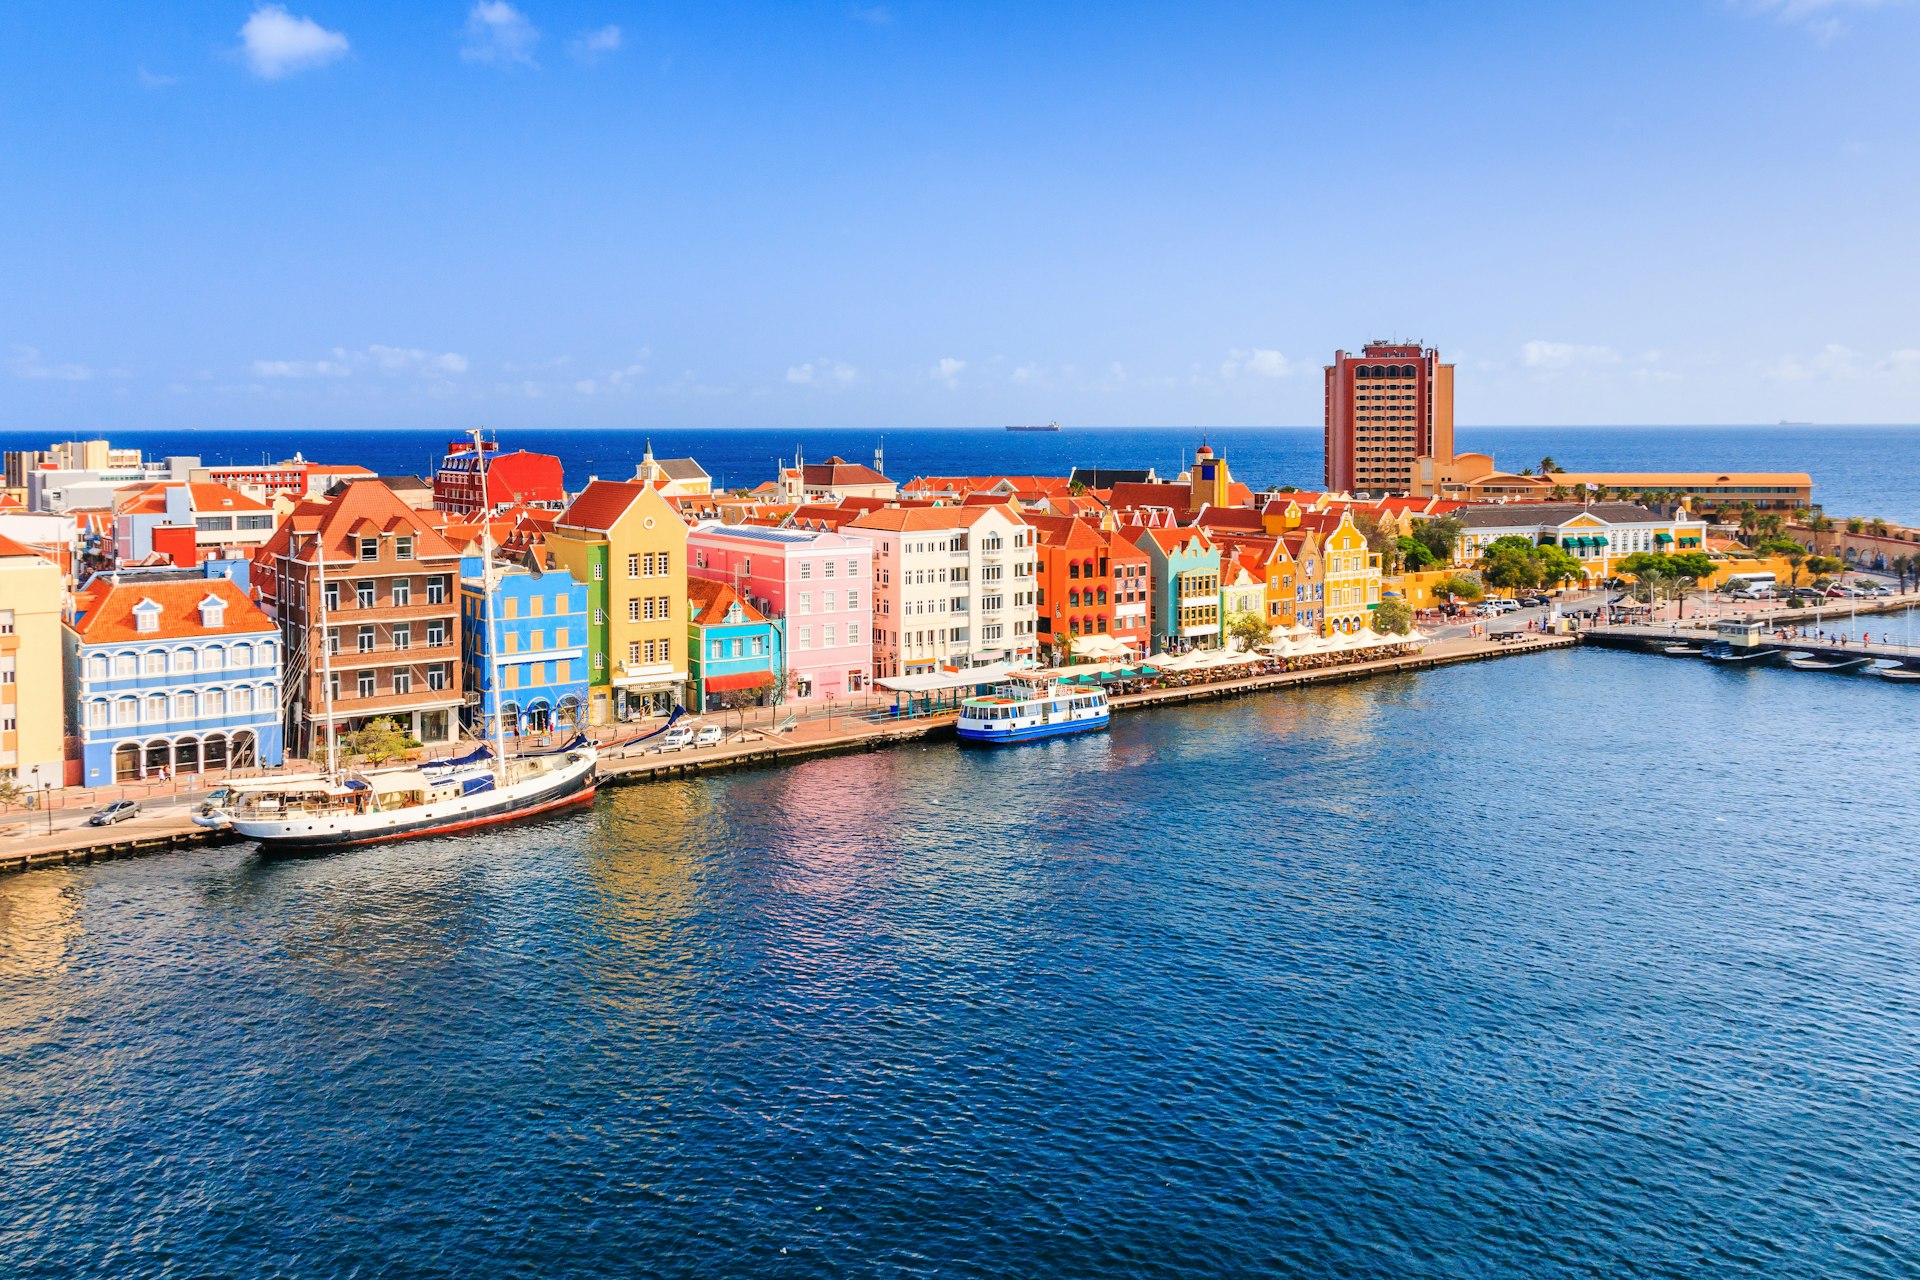 View of colorful buildings in downtown Willemstad, Curaçao